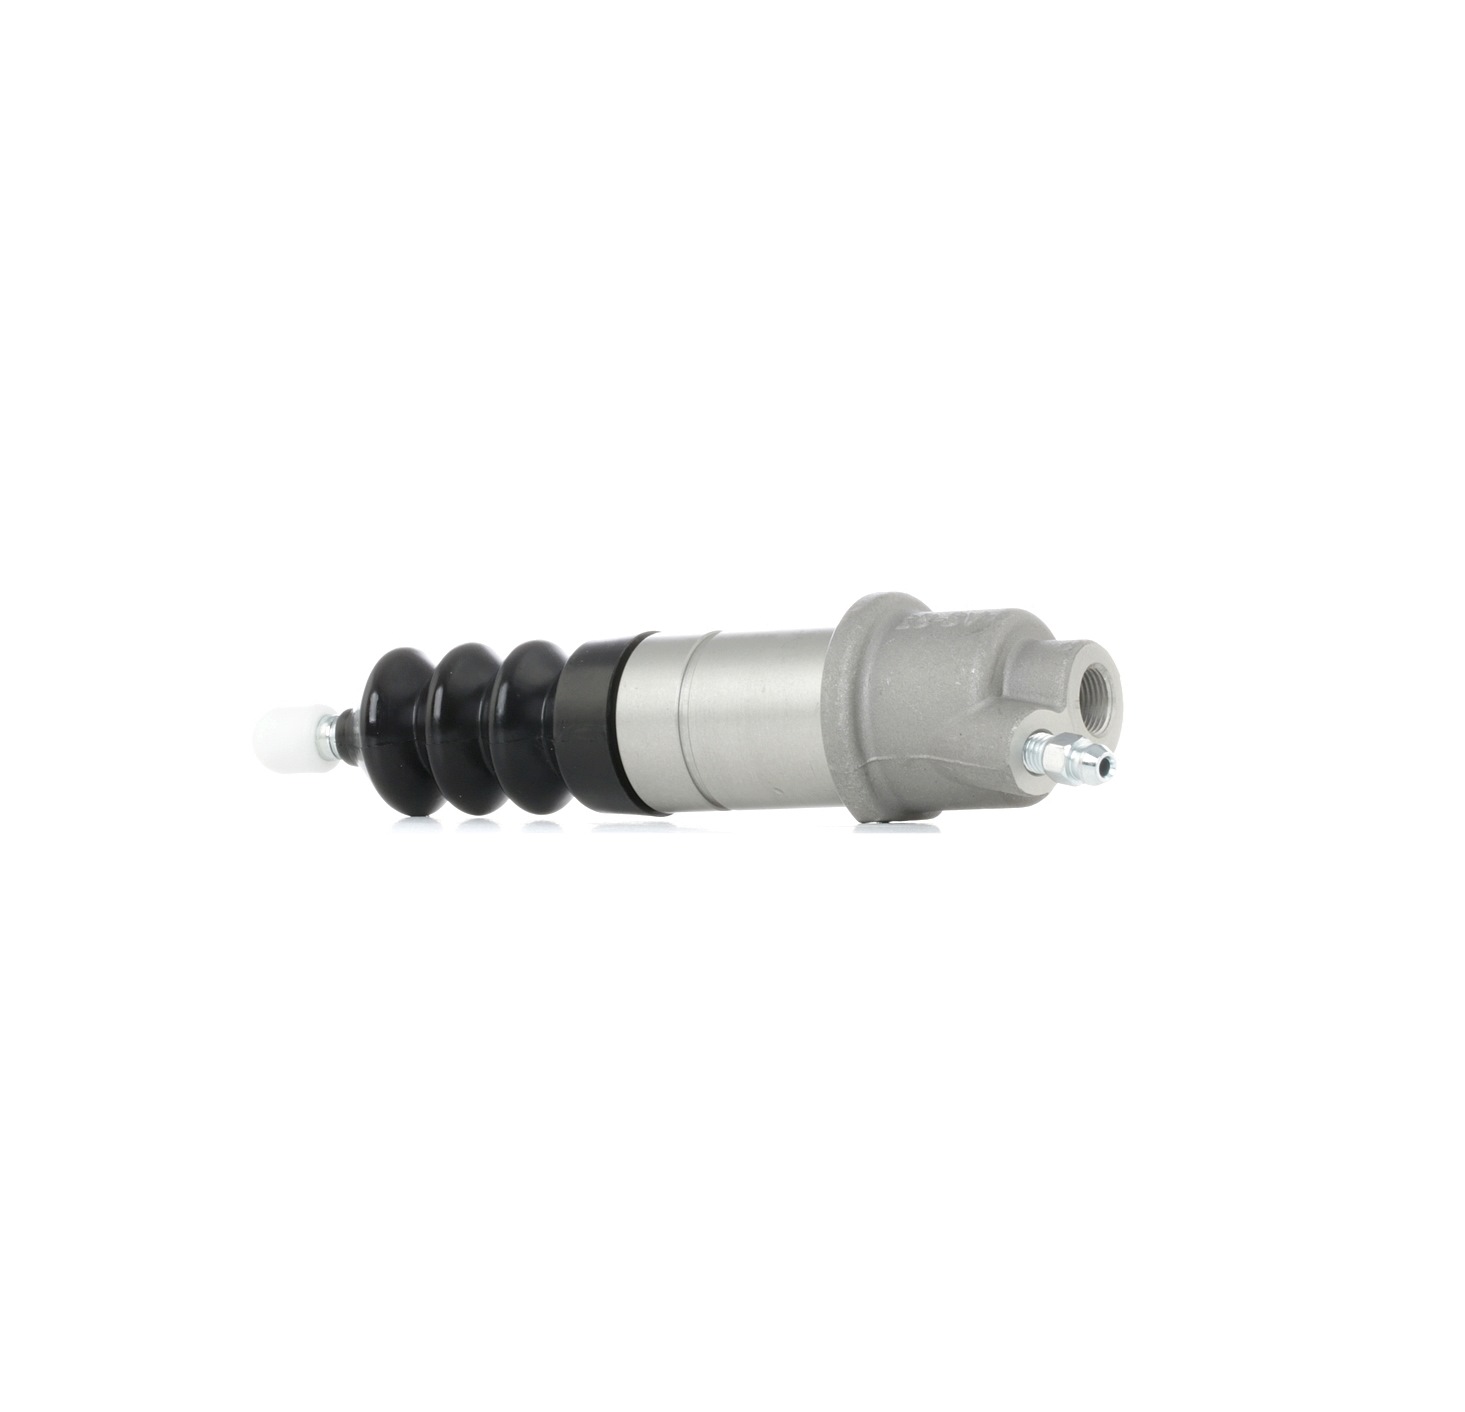 RIDEX Récepteur d'Embrayage VOLVO 620S0148 1205733,1273681,12736815 Cylindre Récepteur d'Embrayage,Cylindre récepteur, embrayage 12736817,6843913